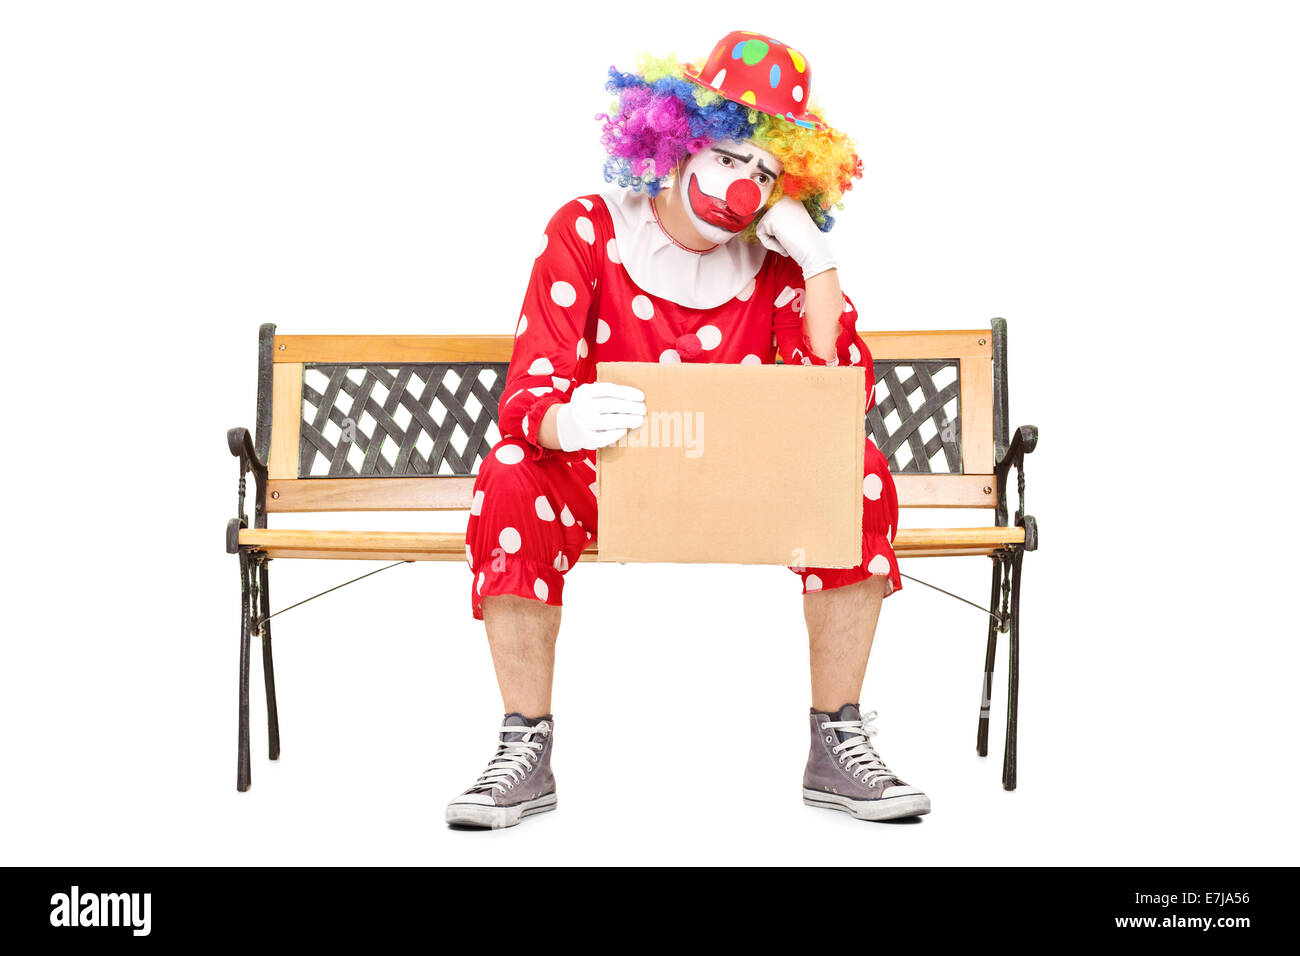 Sad male clown sitting on a wooden bench and holding a blank cardboard sign isolated on white background Stock Photo